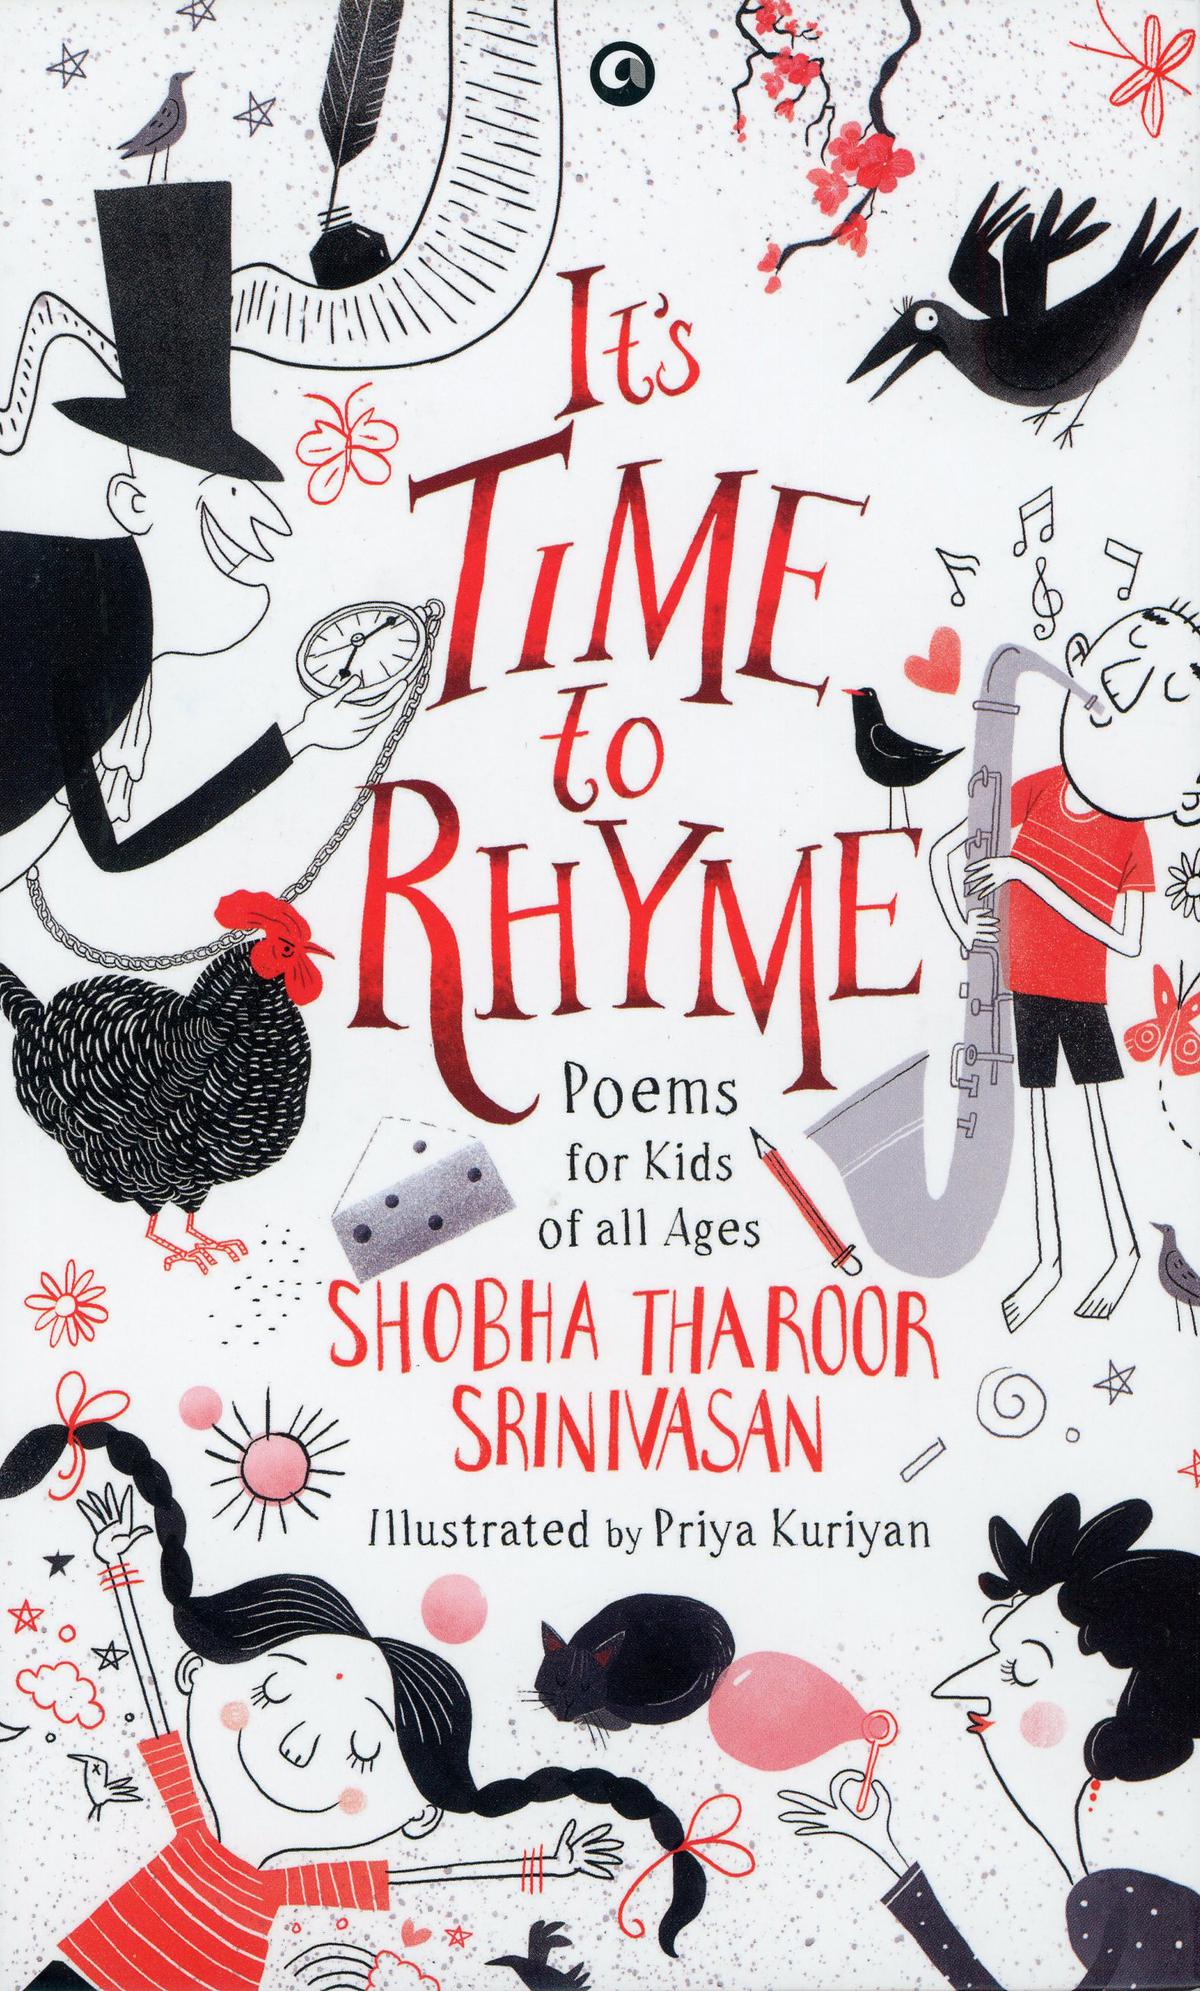 Shobha Tharoor Srinivasan's book of poems to introduce children to poetry and the music of words